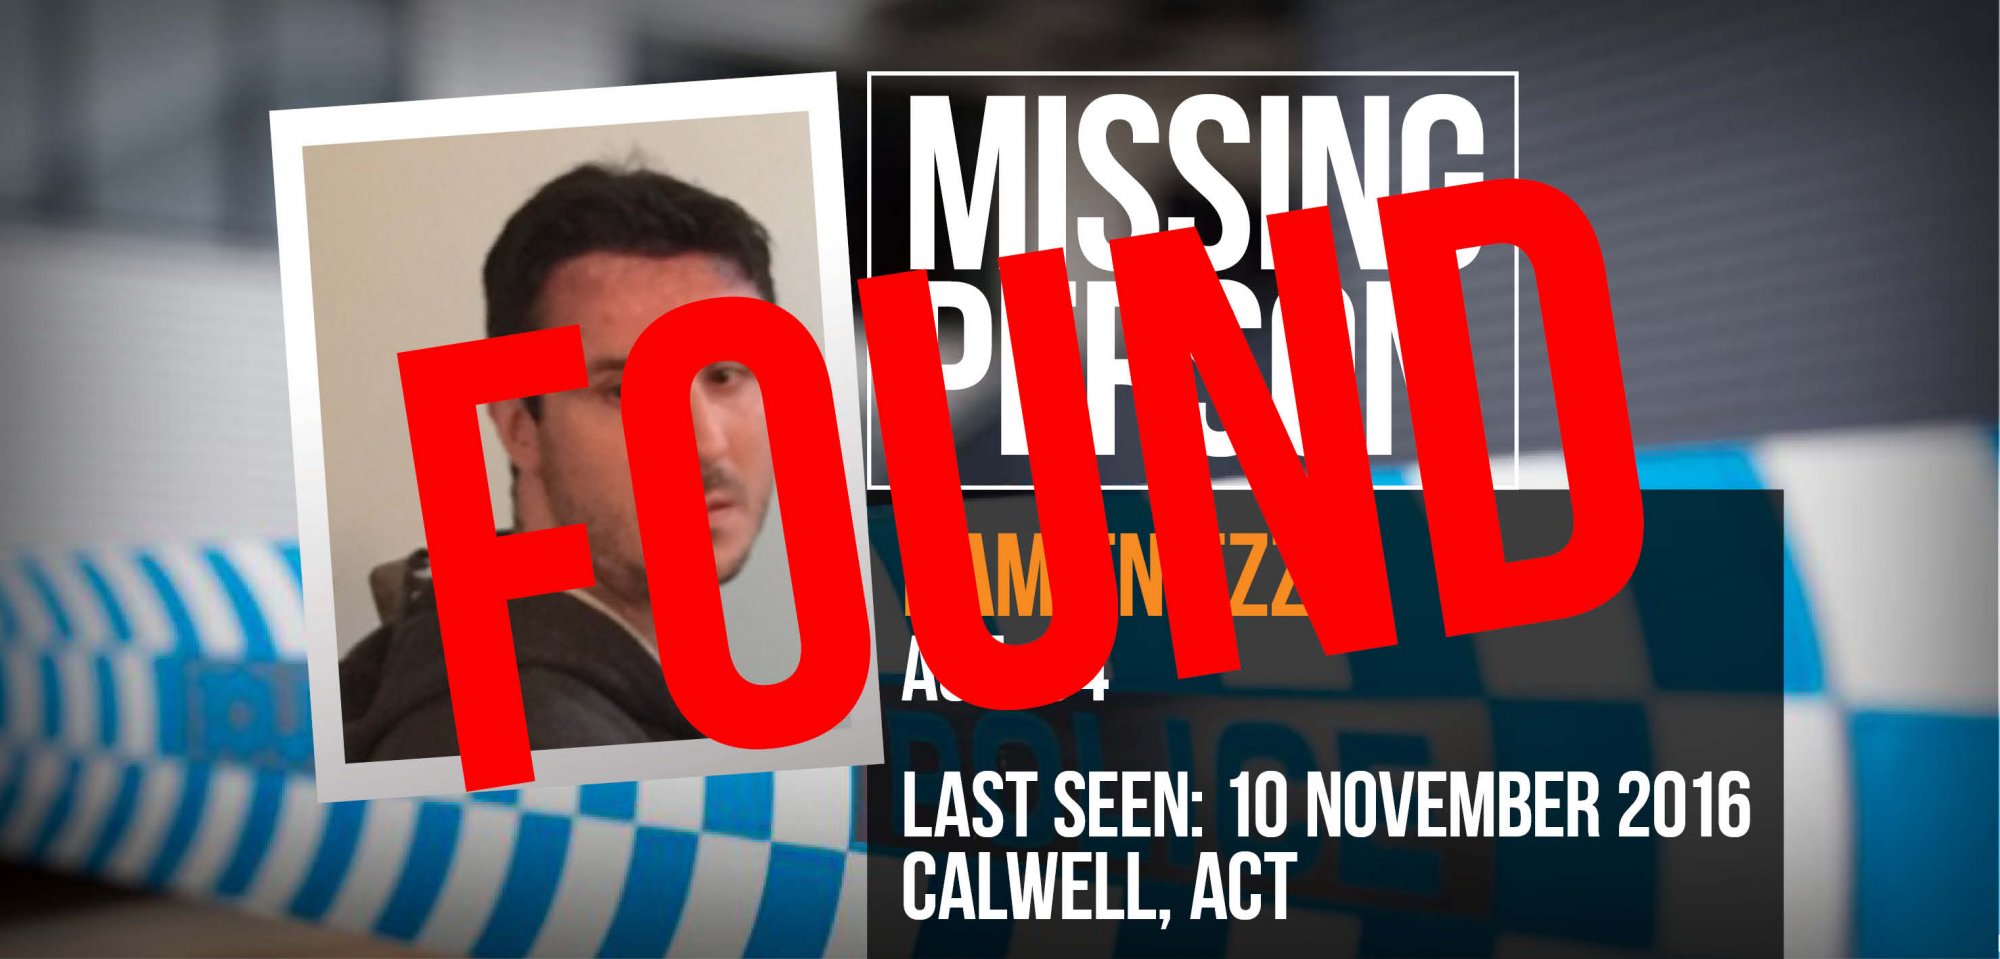 Missing autistic man Damien Ezzy found safe and well